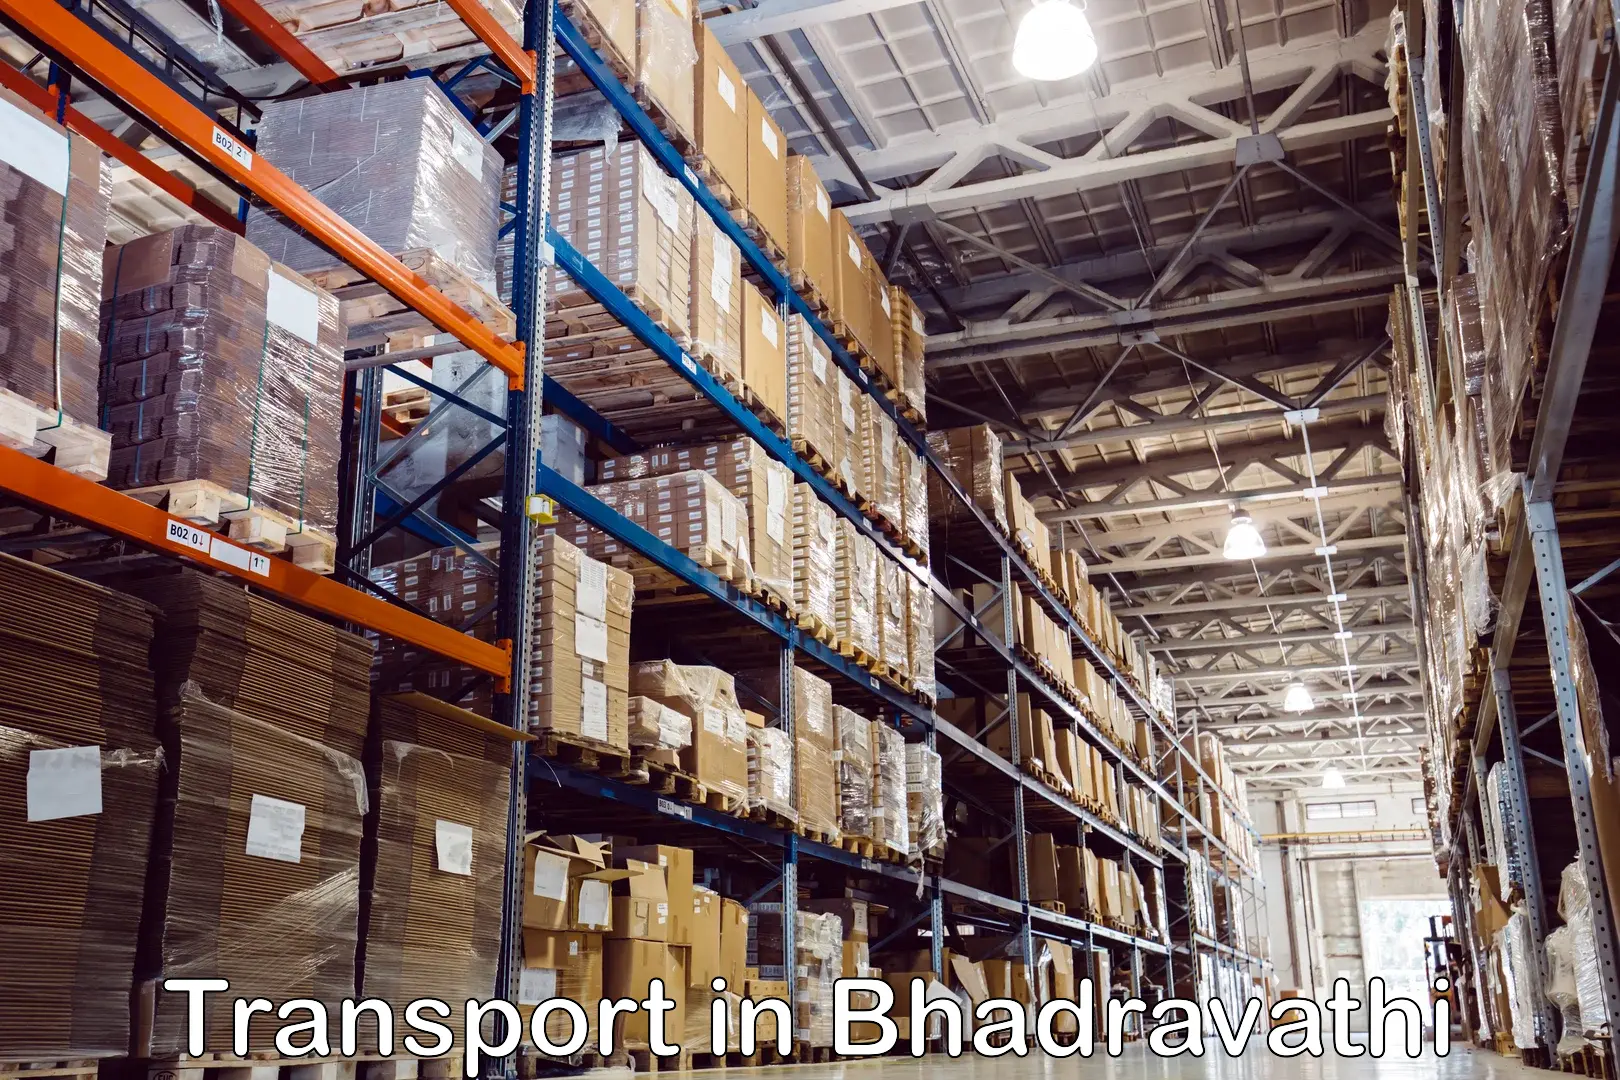 Road transport services in Bhadravathi